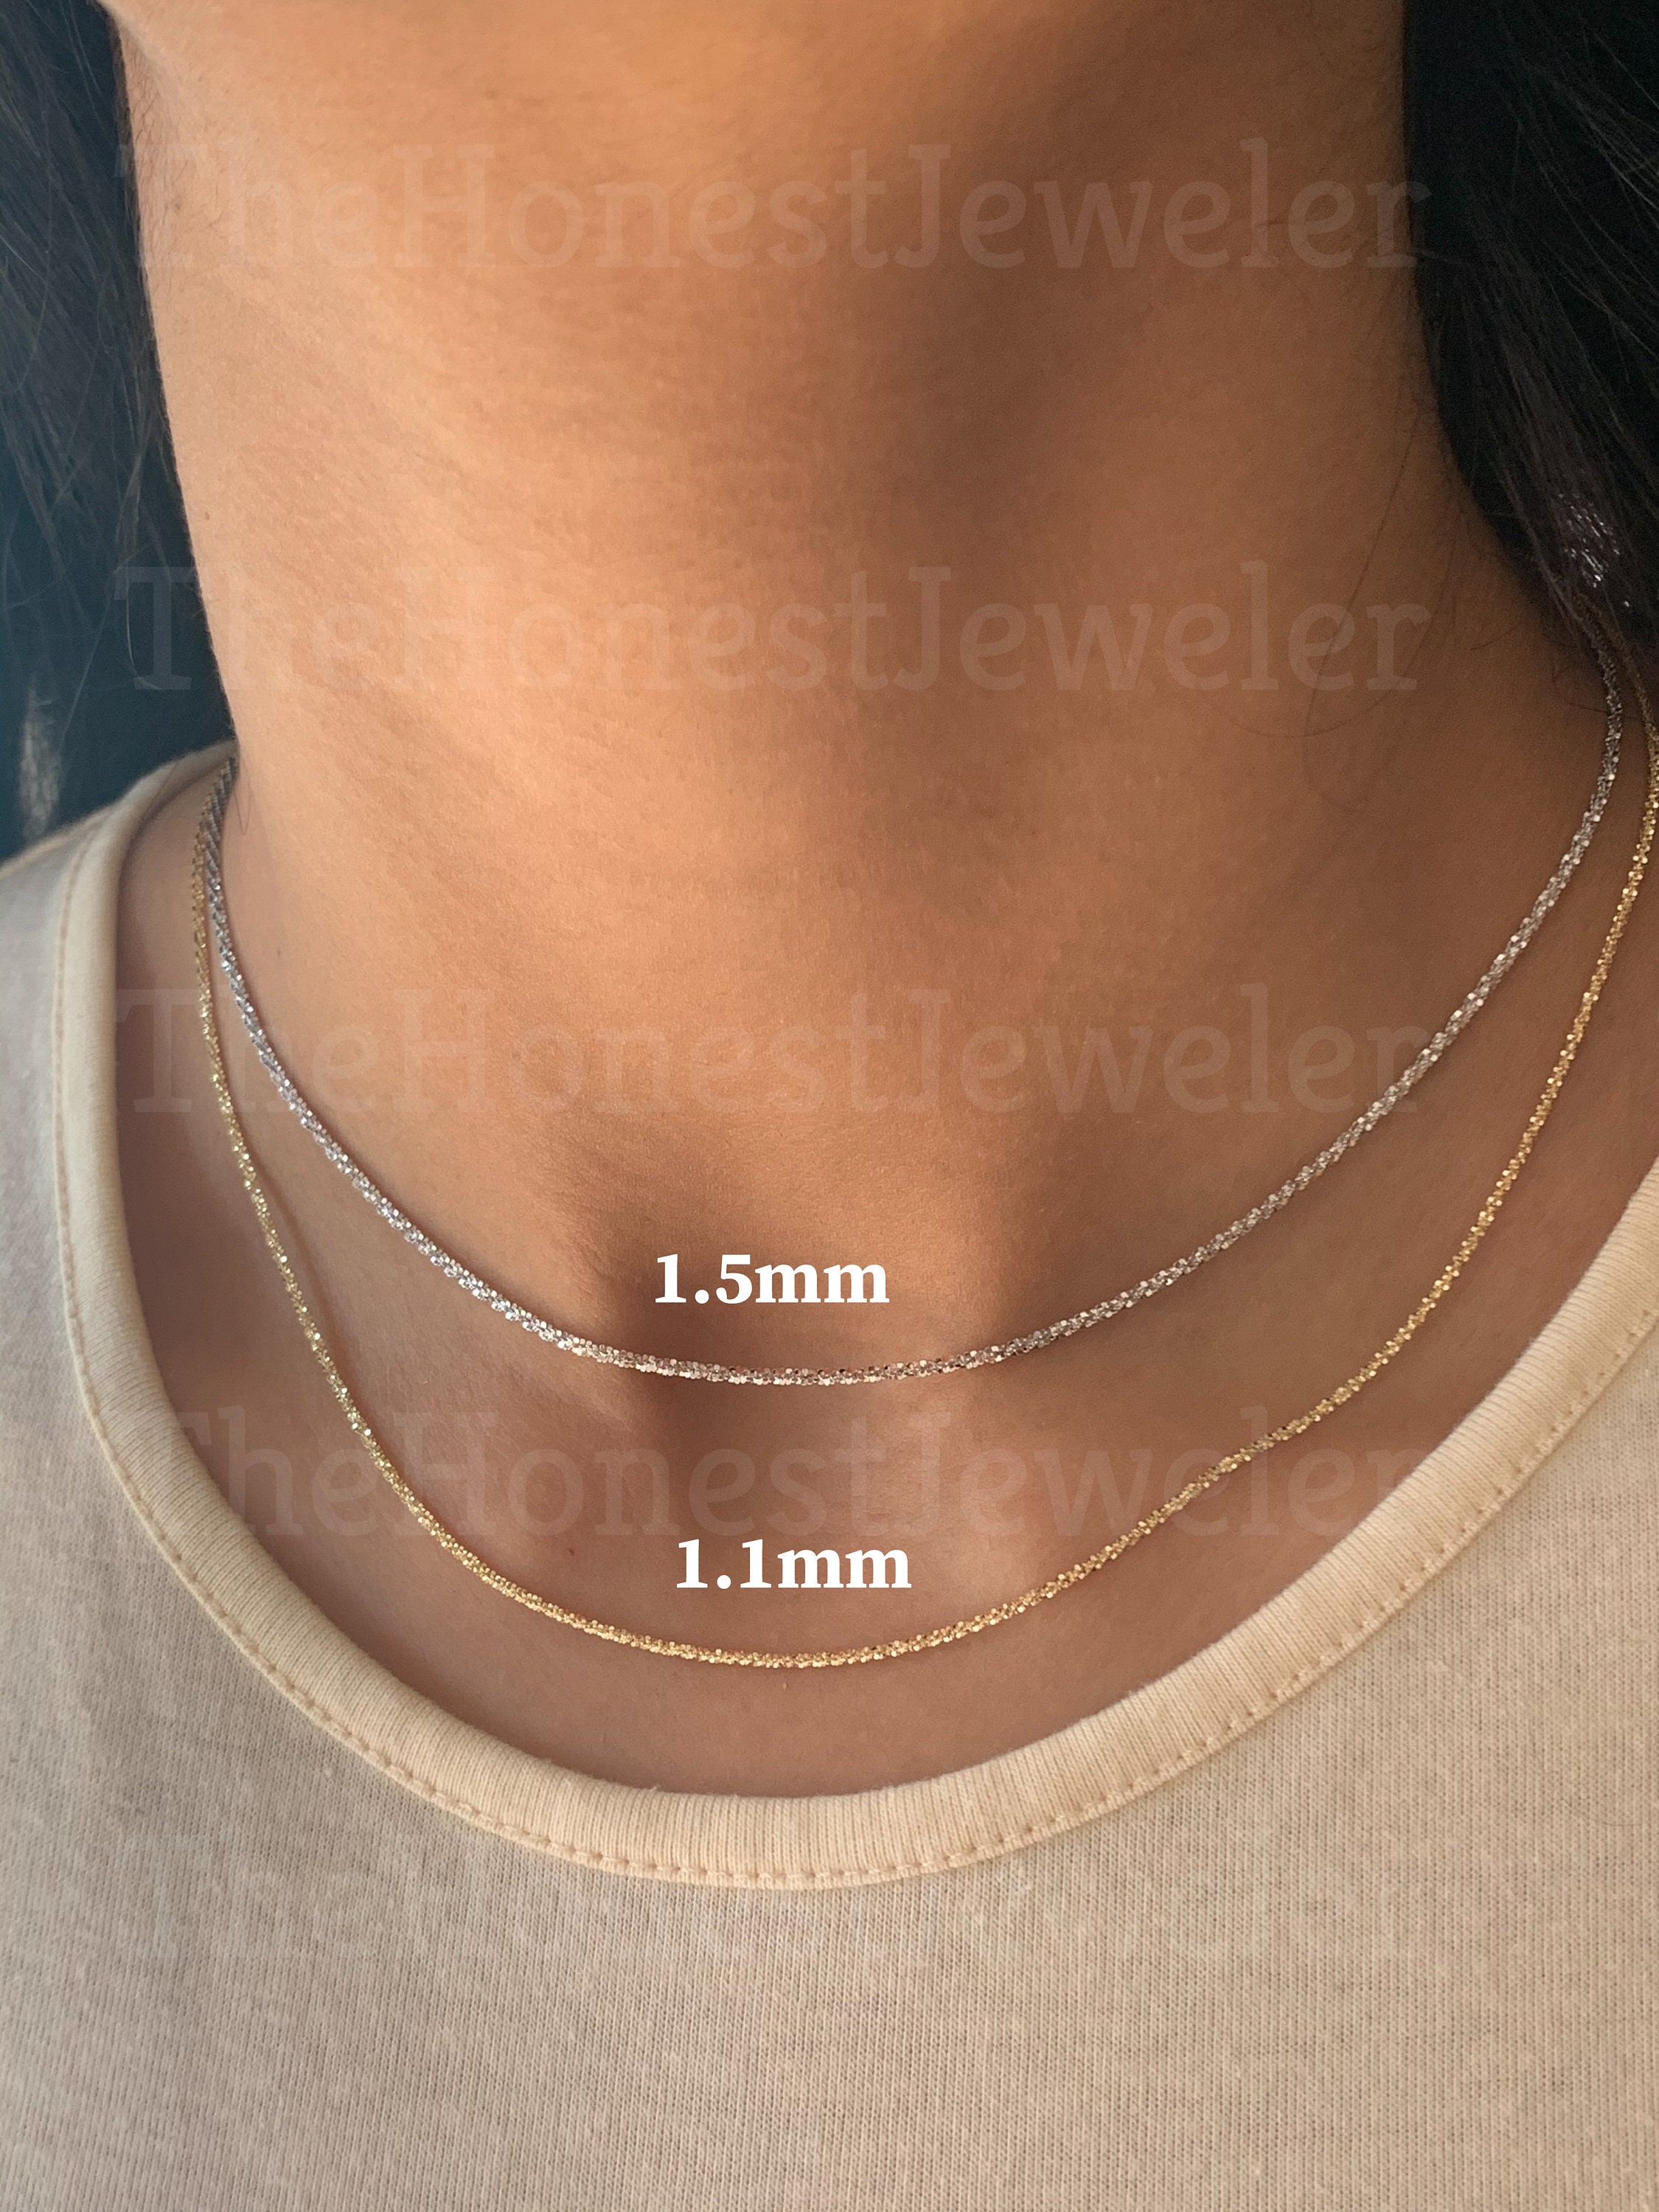 14k Solid Yellow Gold High Polish Herringbone Necklace Chain 1620 3mm 4mm,  4.7mm, 6mm, Multi-strand Layering Necklace/ Chain/best Selling 